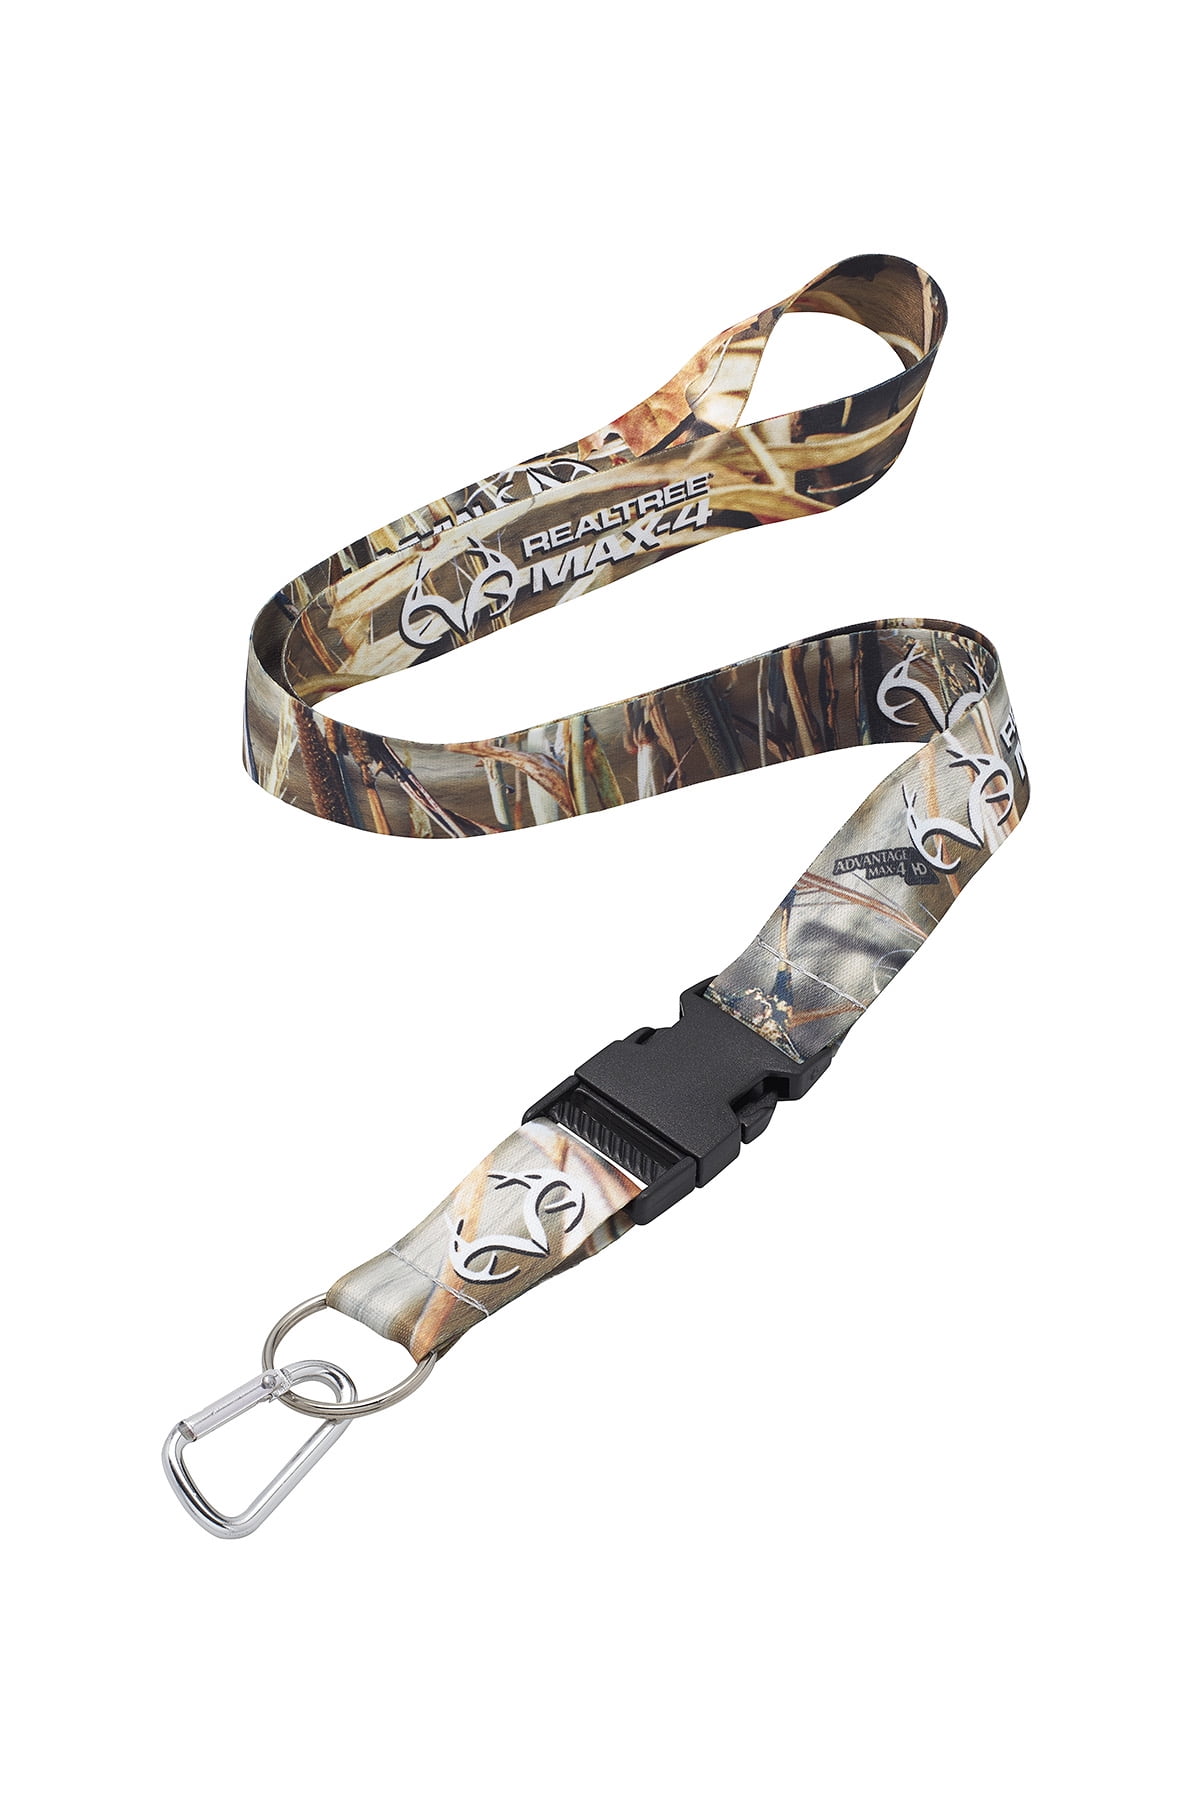 Compass Light Stick Keys Camouflage Lanyard for ID